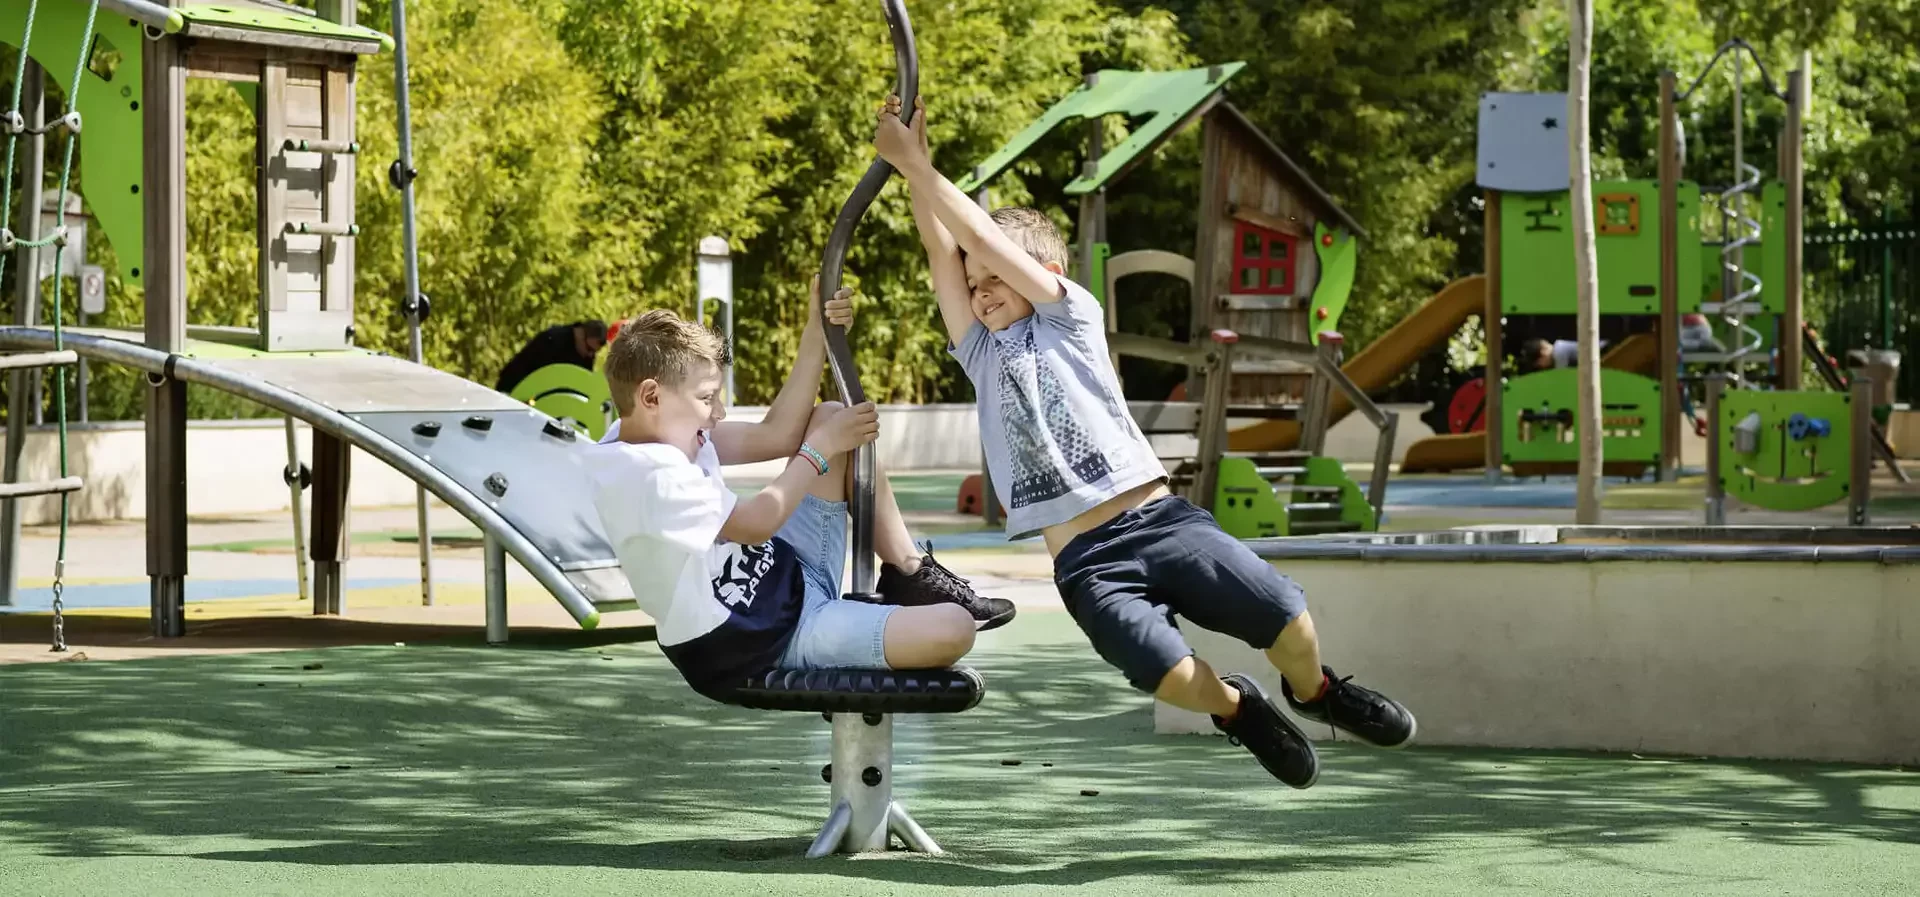 Kids playing together on spinning playground equipment